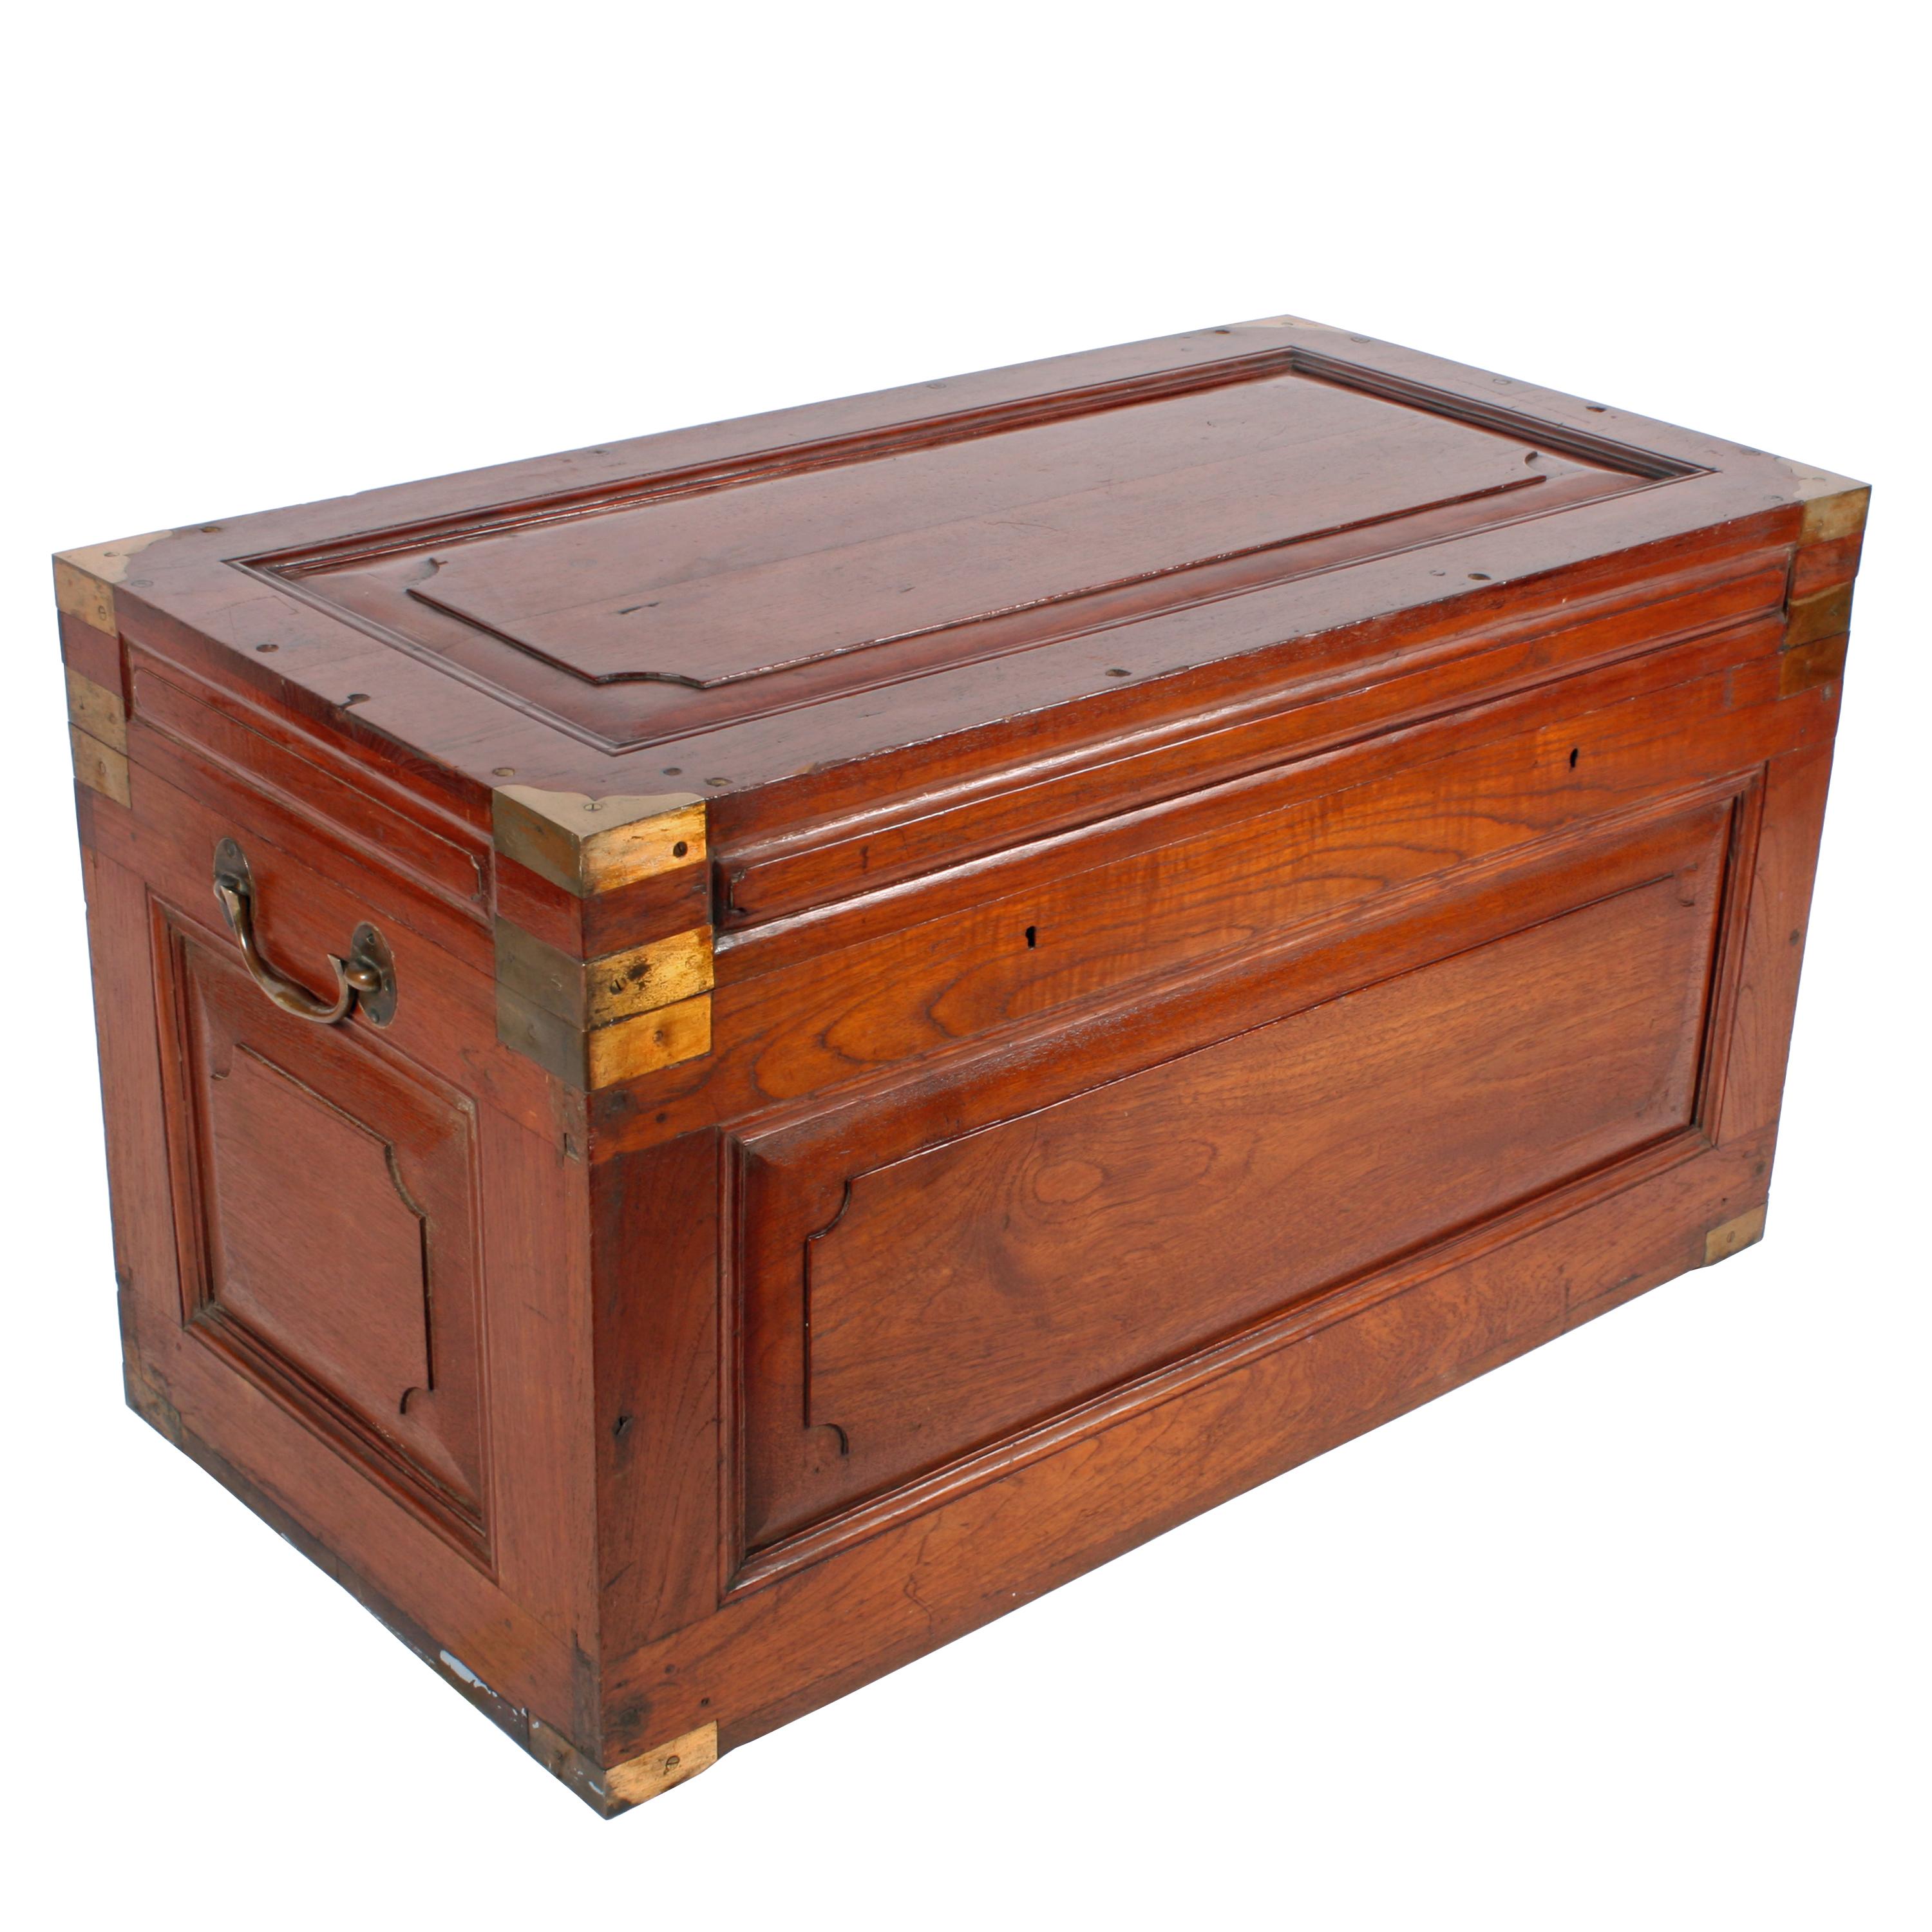 Colonial, brass-bound military teak trunk of unusual design, circa 1860. The top has an inset shaped, fielded panel and fluted moldings and there is a fielded panel decoration to the frieze. It is freestanding with conforming fielded panels on all